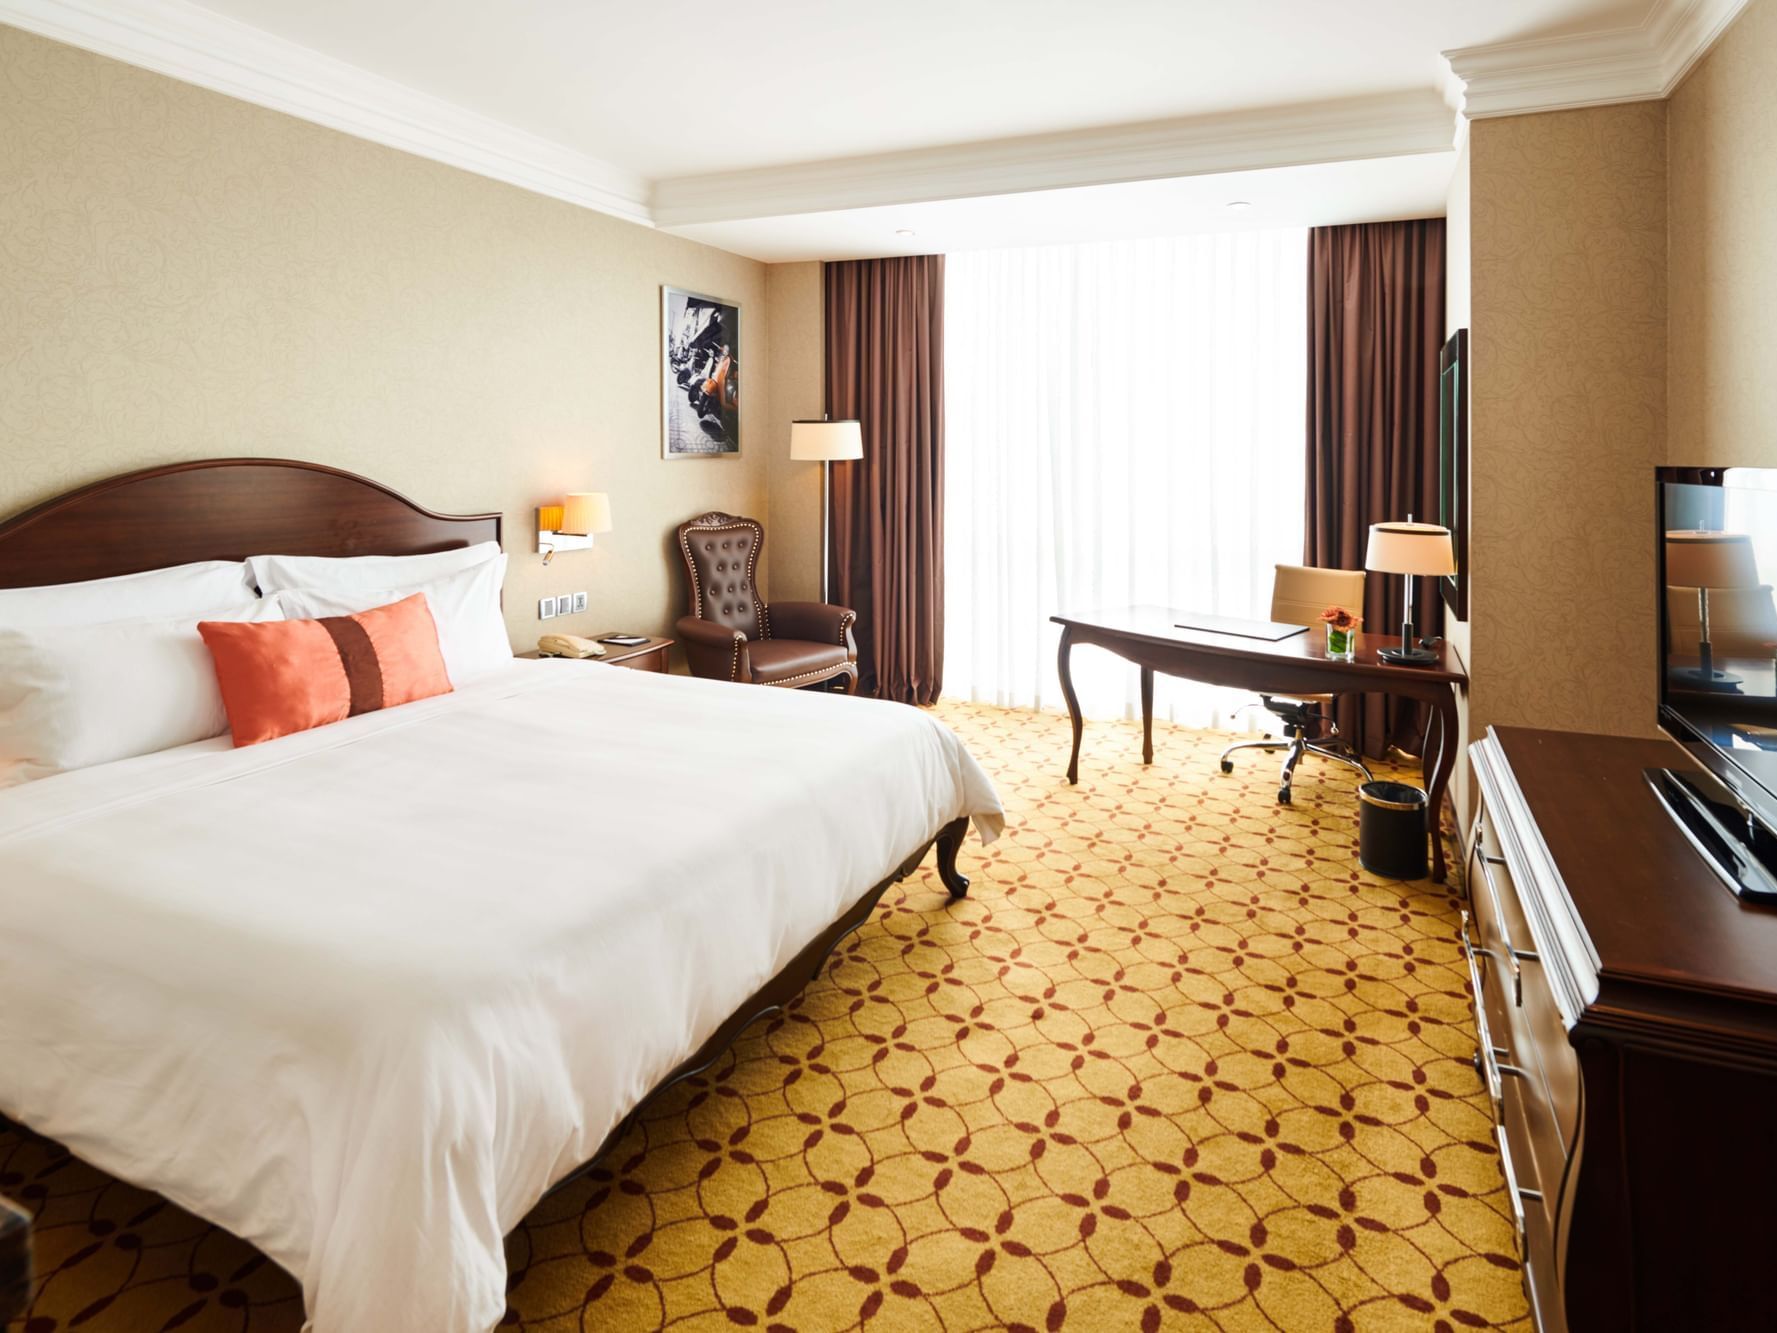 King Bed & furniture in Deluxe Room at Eastin Hotels